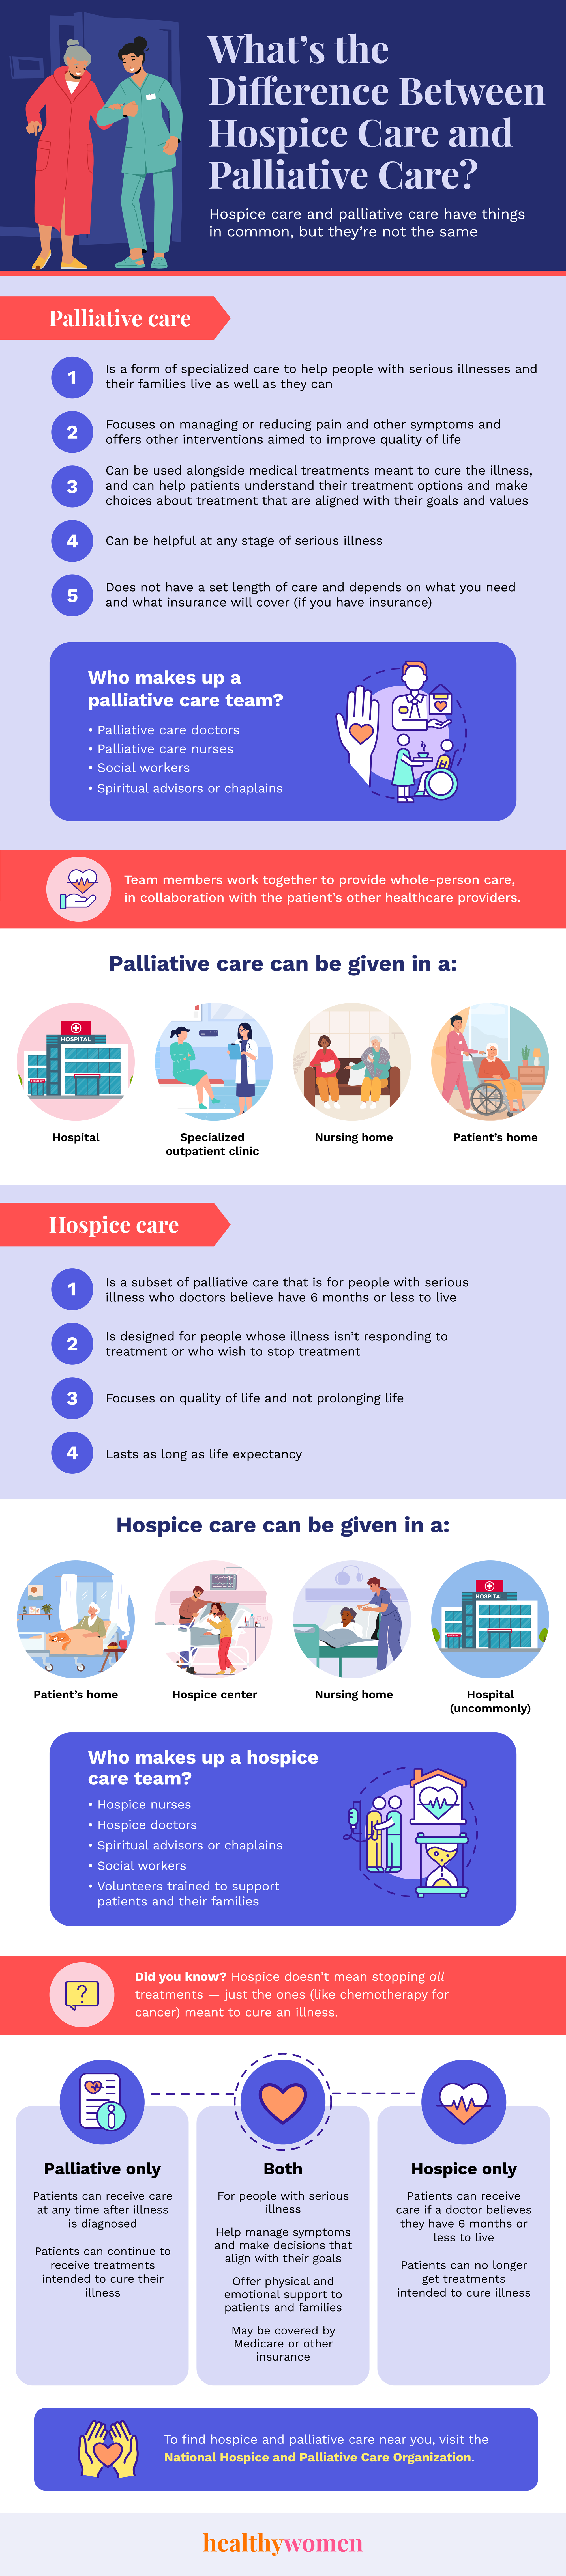 What is the Difference Between Hospice and Palliative Care?  Click image to open PDF